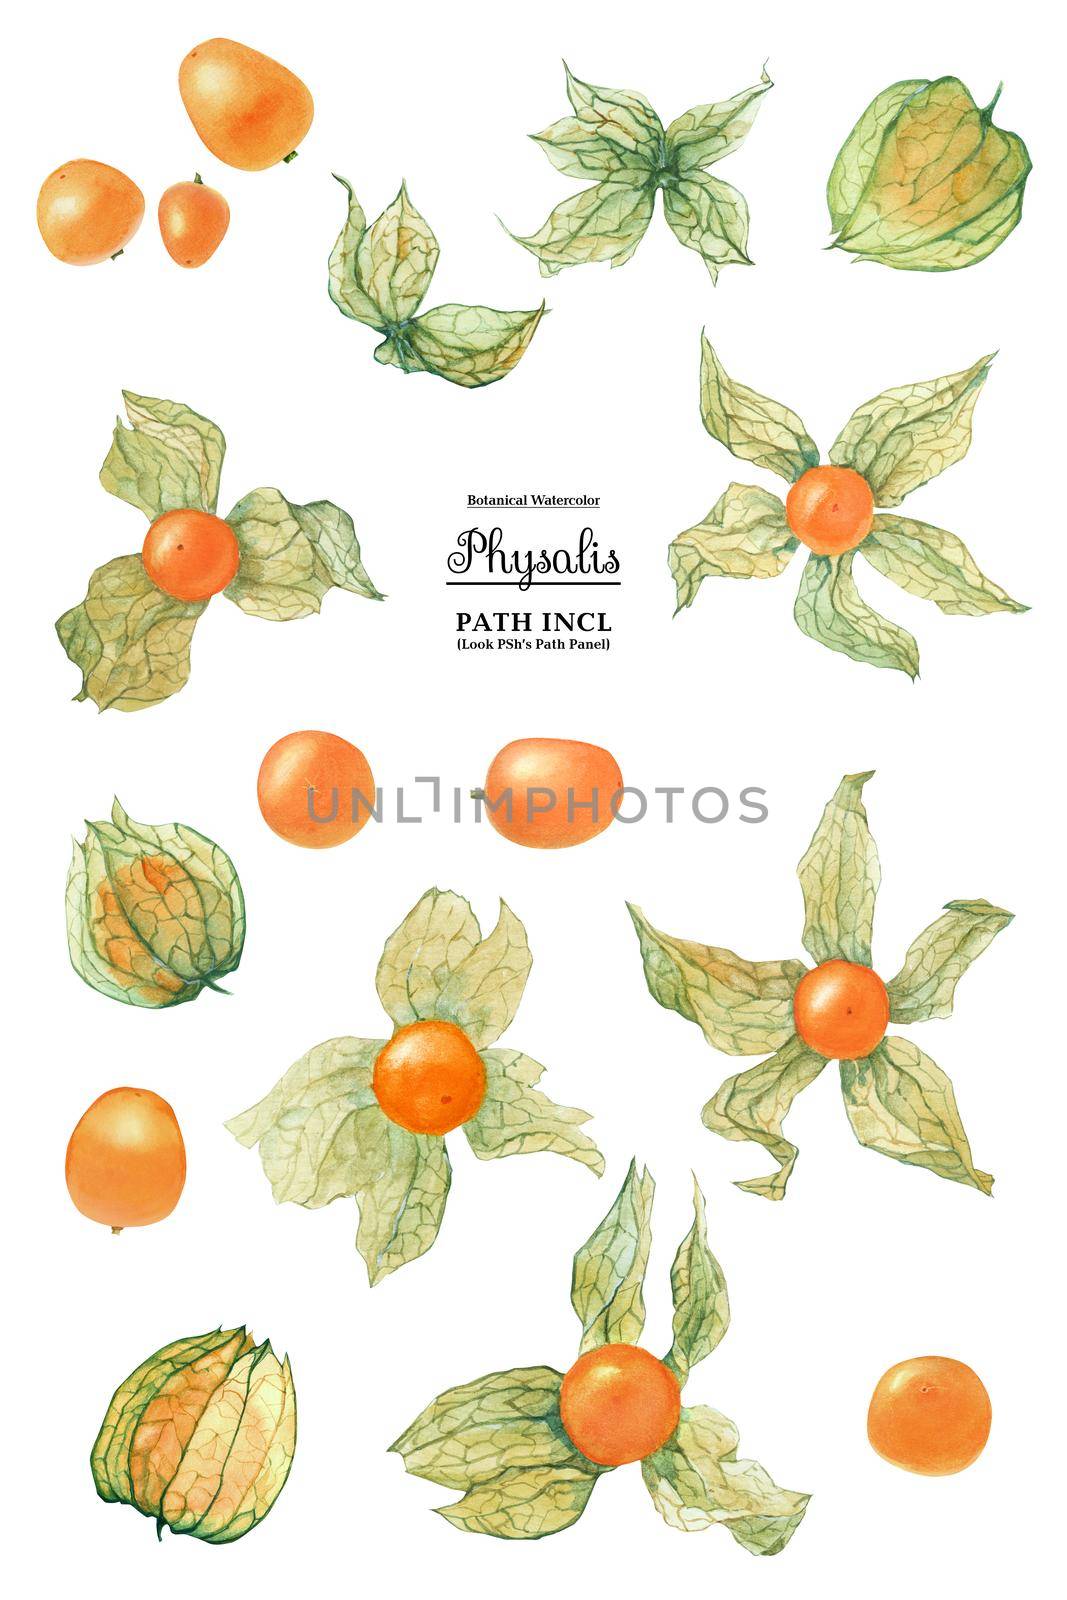 Watercolor botanical realistic illustration. Physalis on a white background, path included.